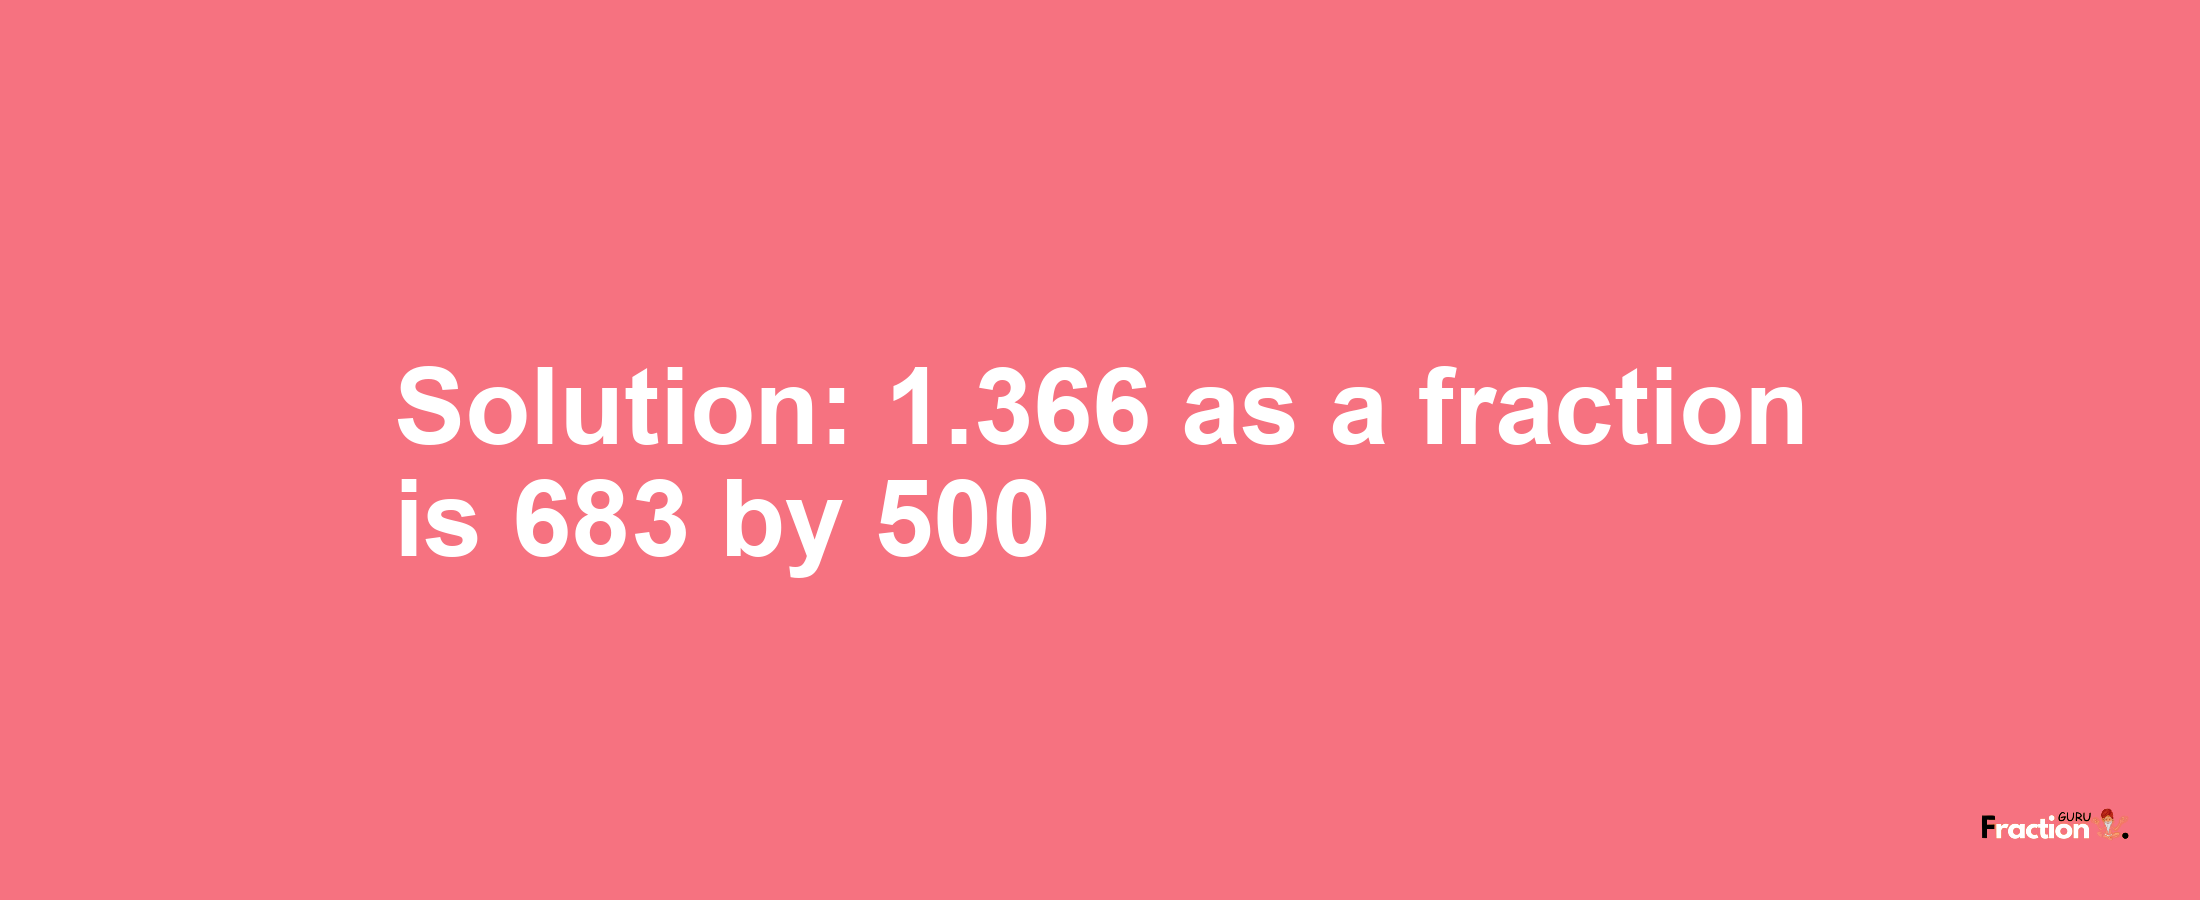 Solution:1.366 as a fraction is 683/500